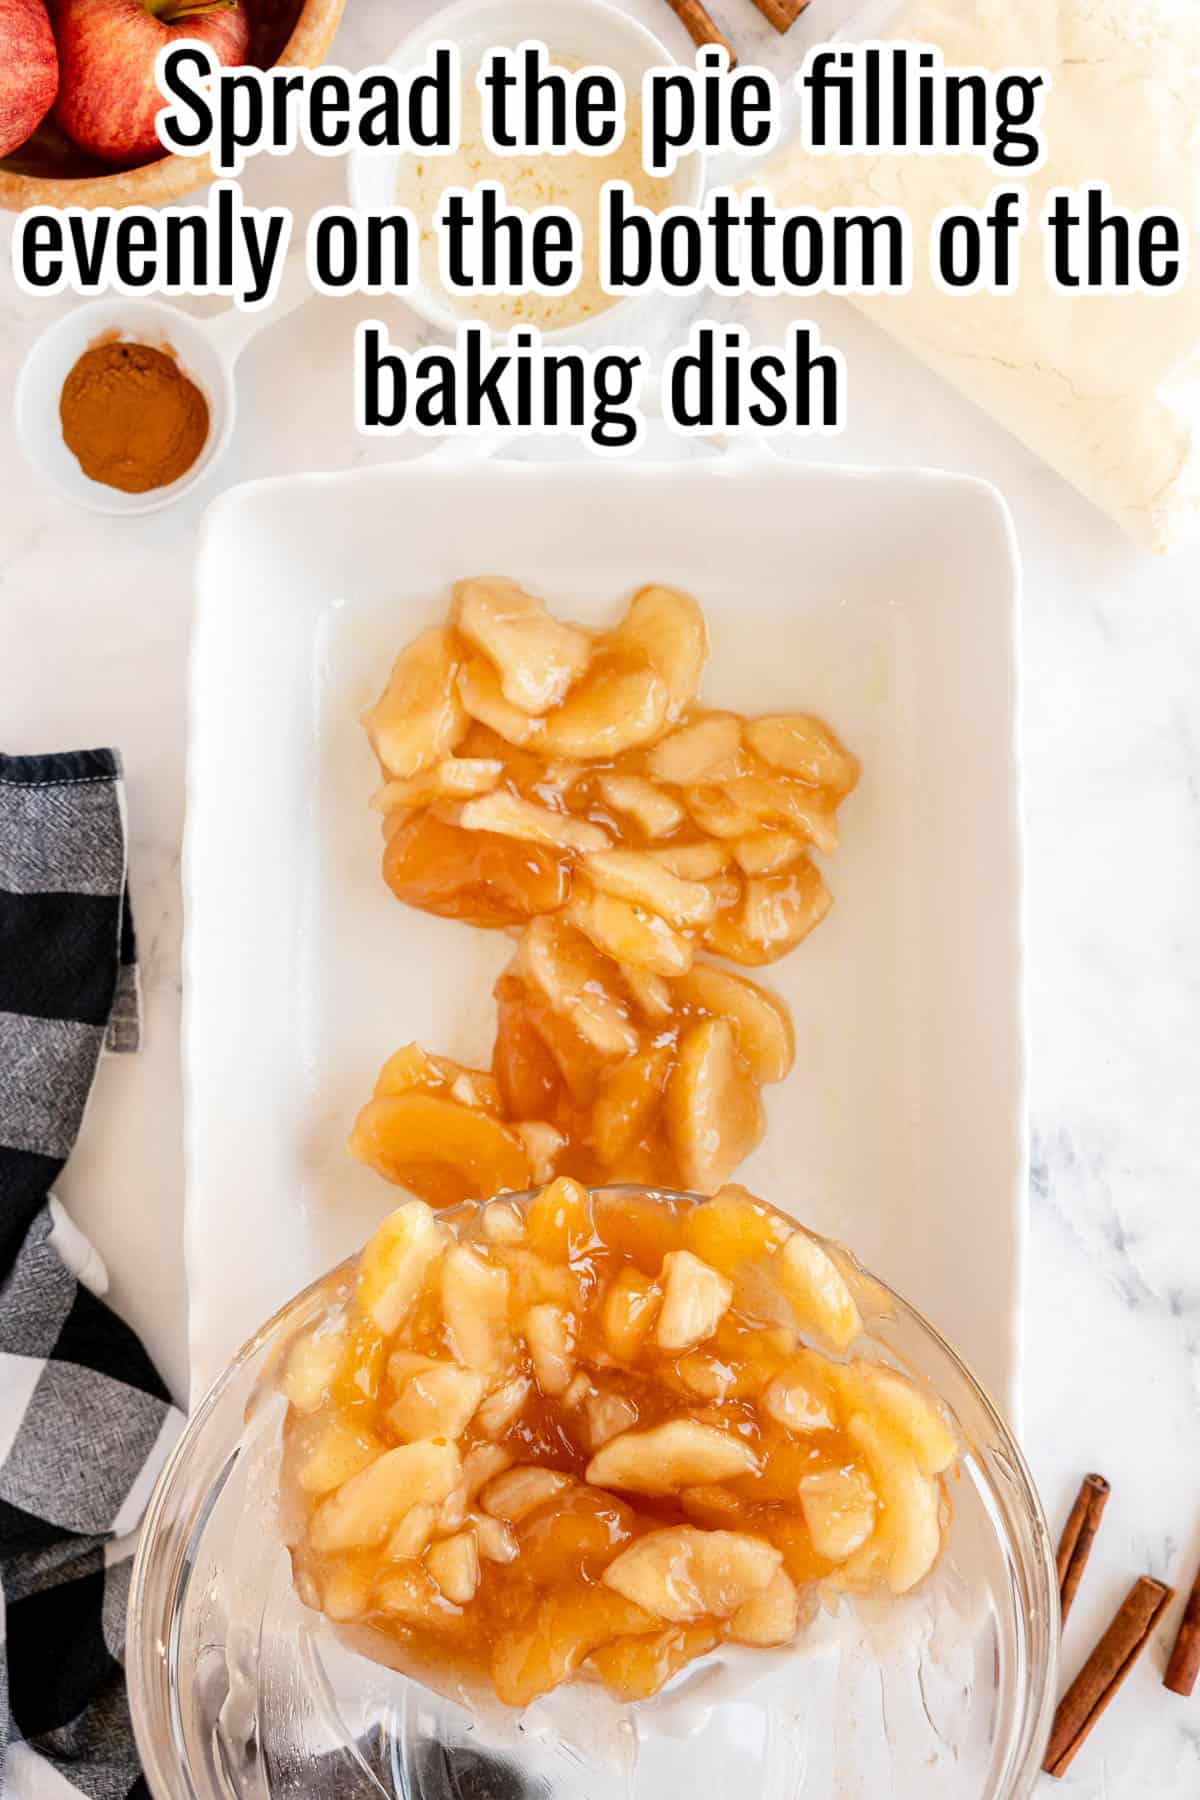 Spread the pie filling evenly on the bottom of the baking dish for an Apple Dump Cake.